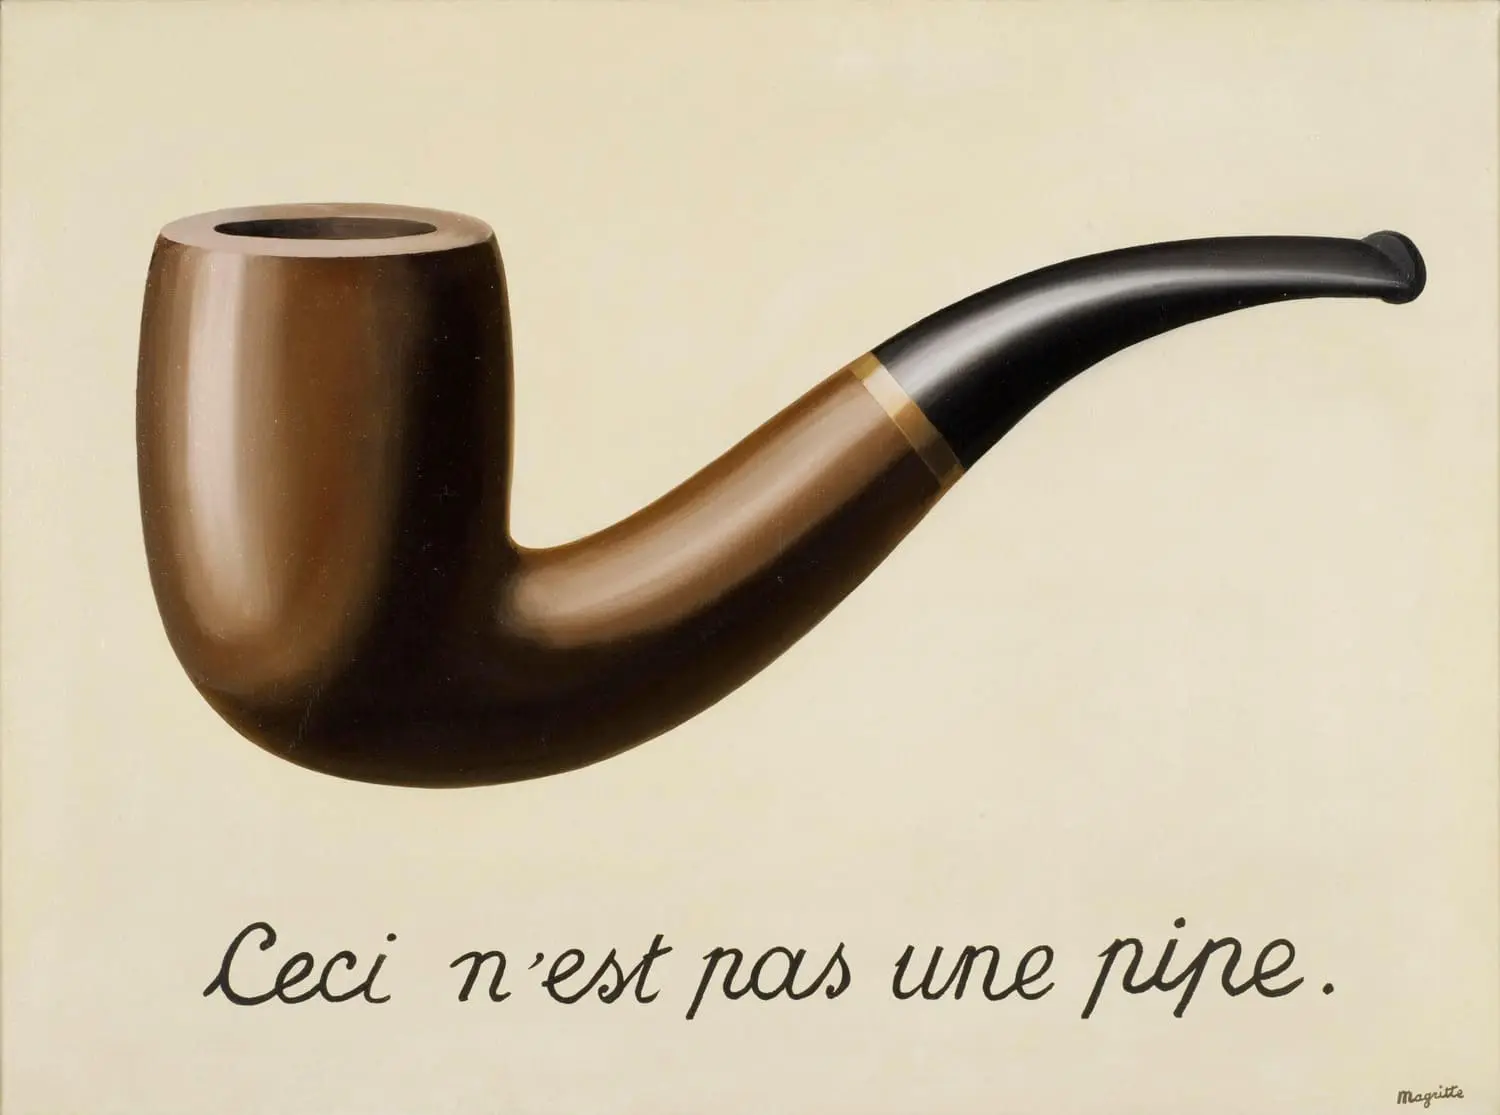 "The Treachery of images (This is not a pipe)", Rene Magritte - Description of the Painting